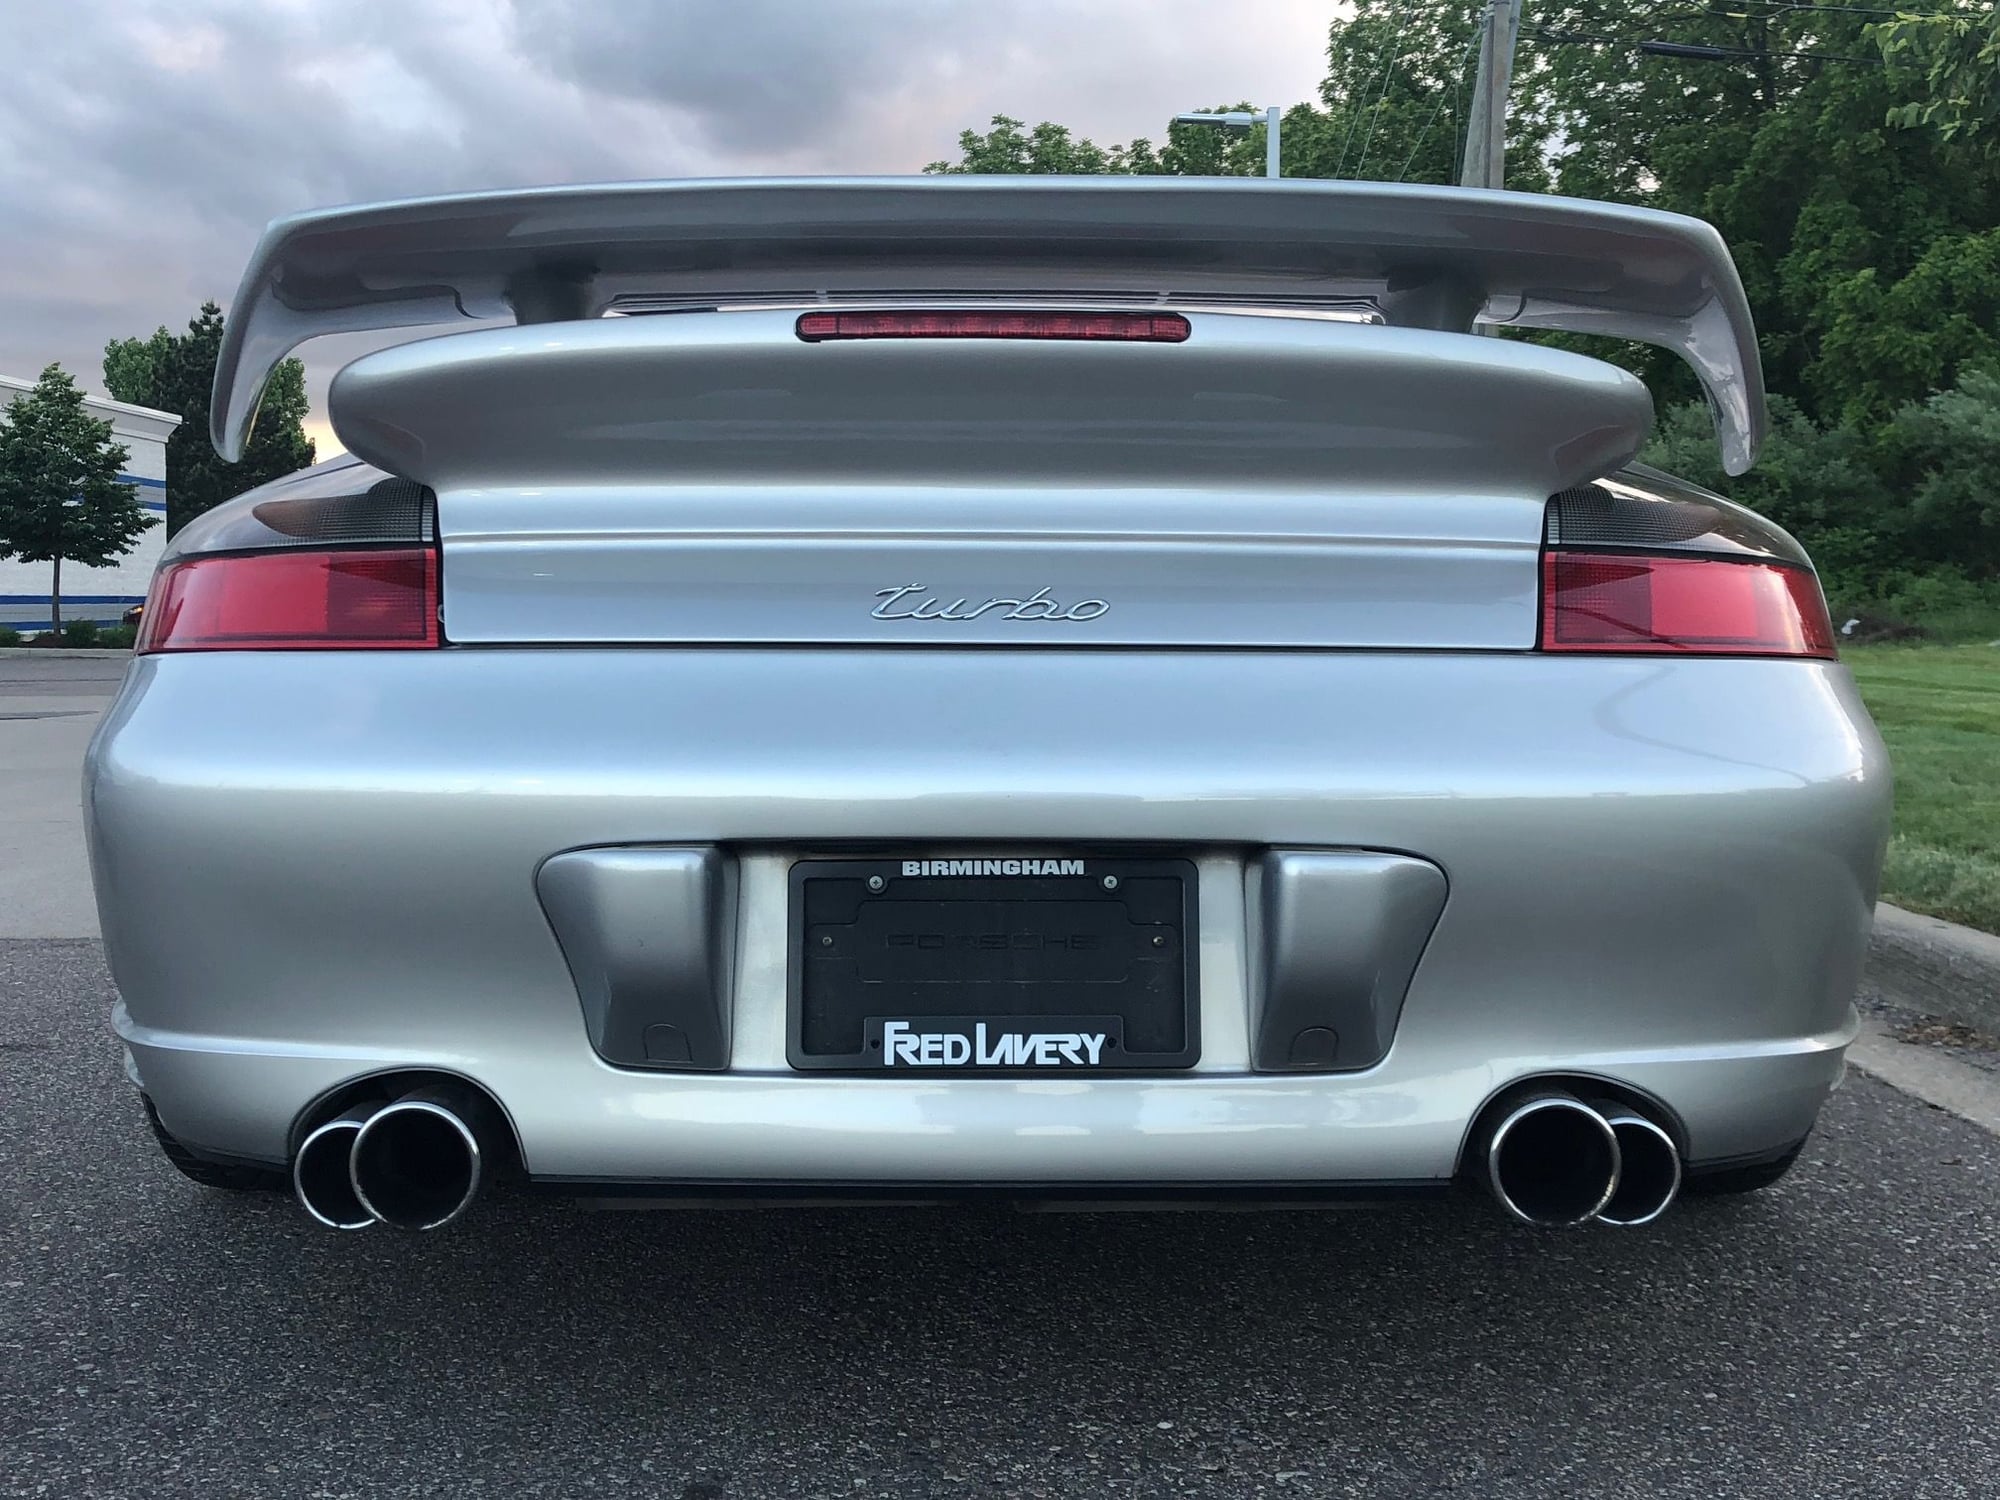 Engine - Exhaust - FS: 996 Turbo TechArt Exhaust w/ Cats - Used - 2001 to 2005 Porsche 911 - Cleveland, OH 44011, United States